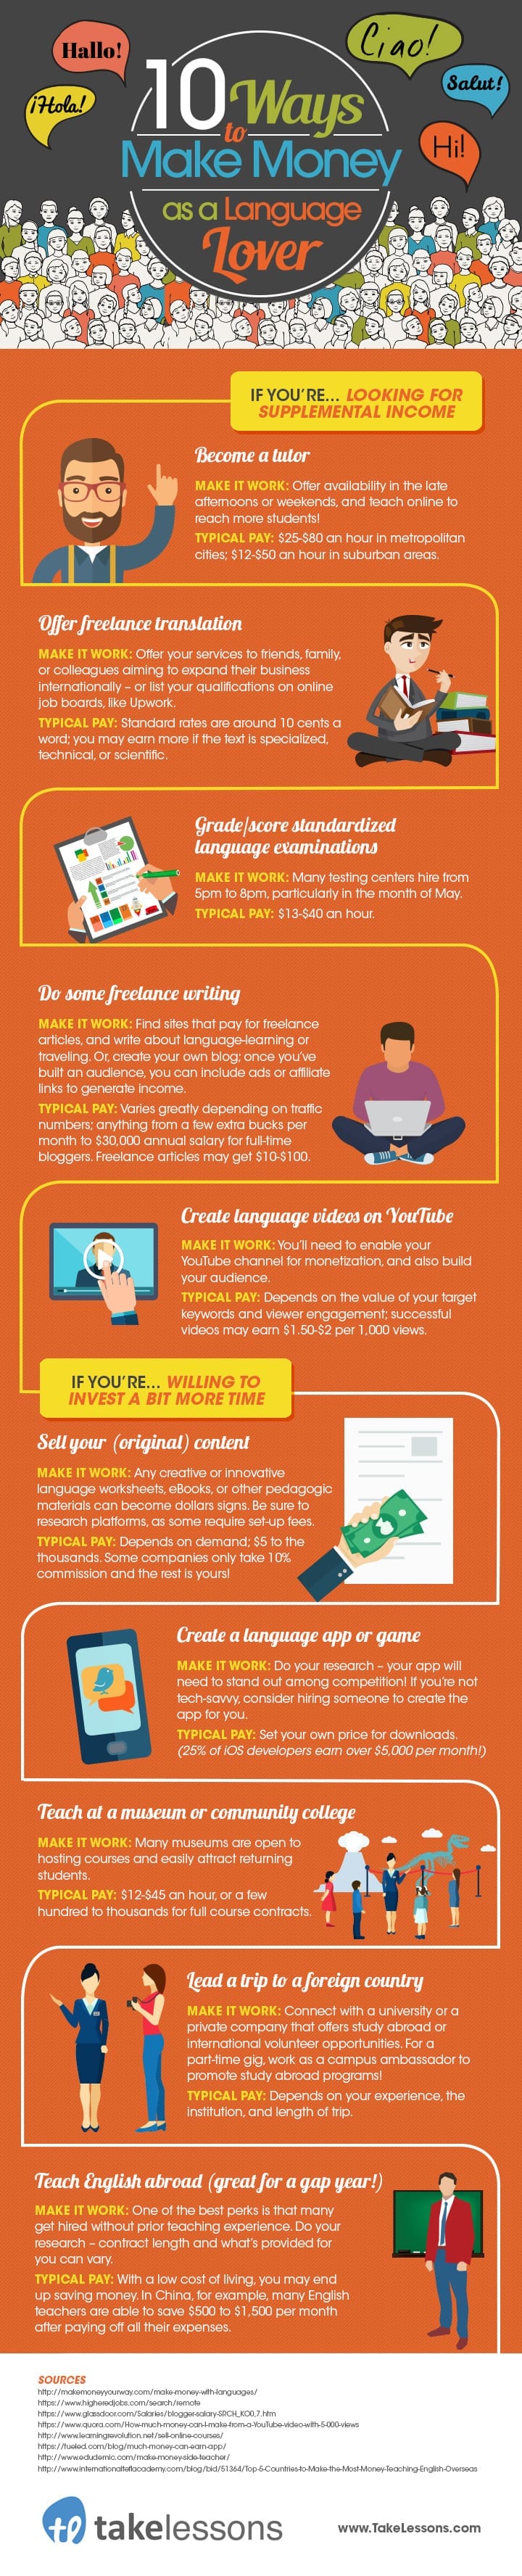 10 Ways To Make Money As A Language Lover Infographic - 10 ways to make money as a language lover